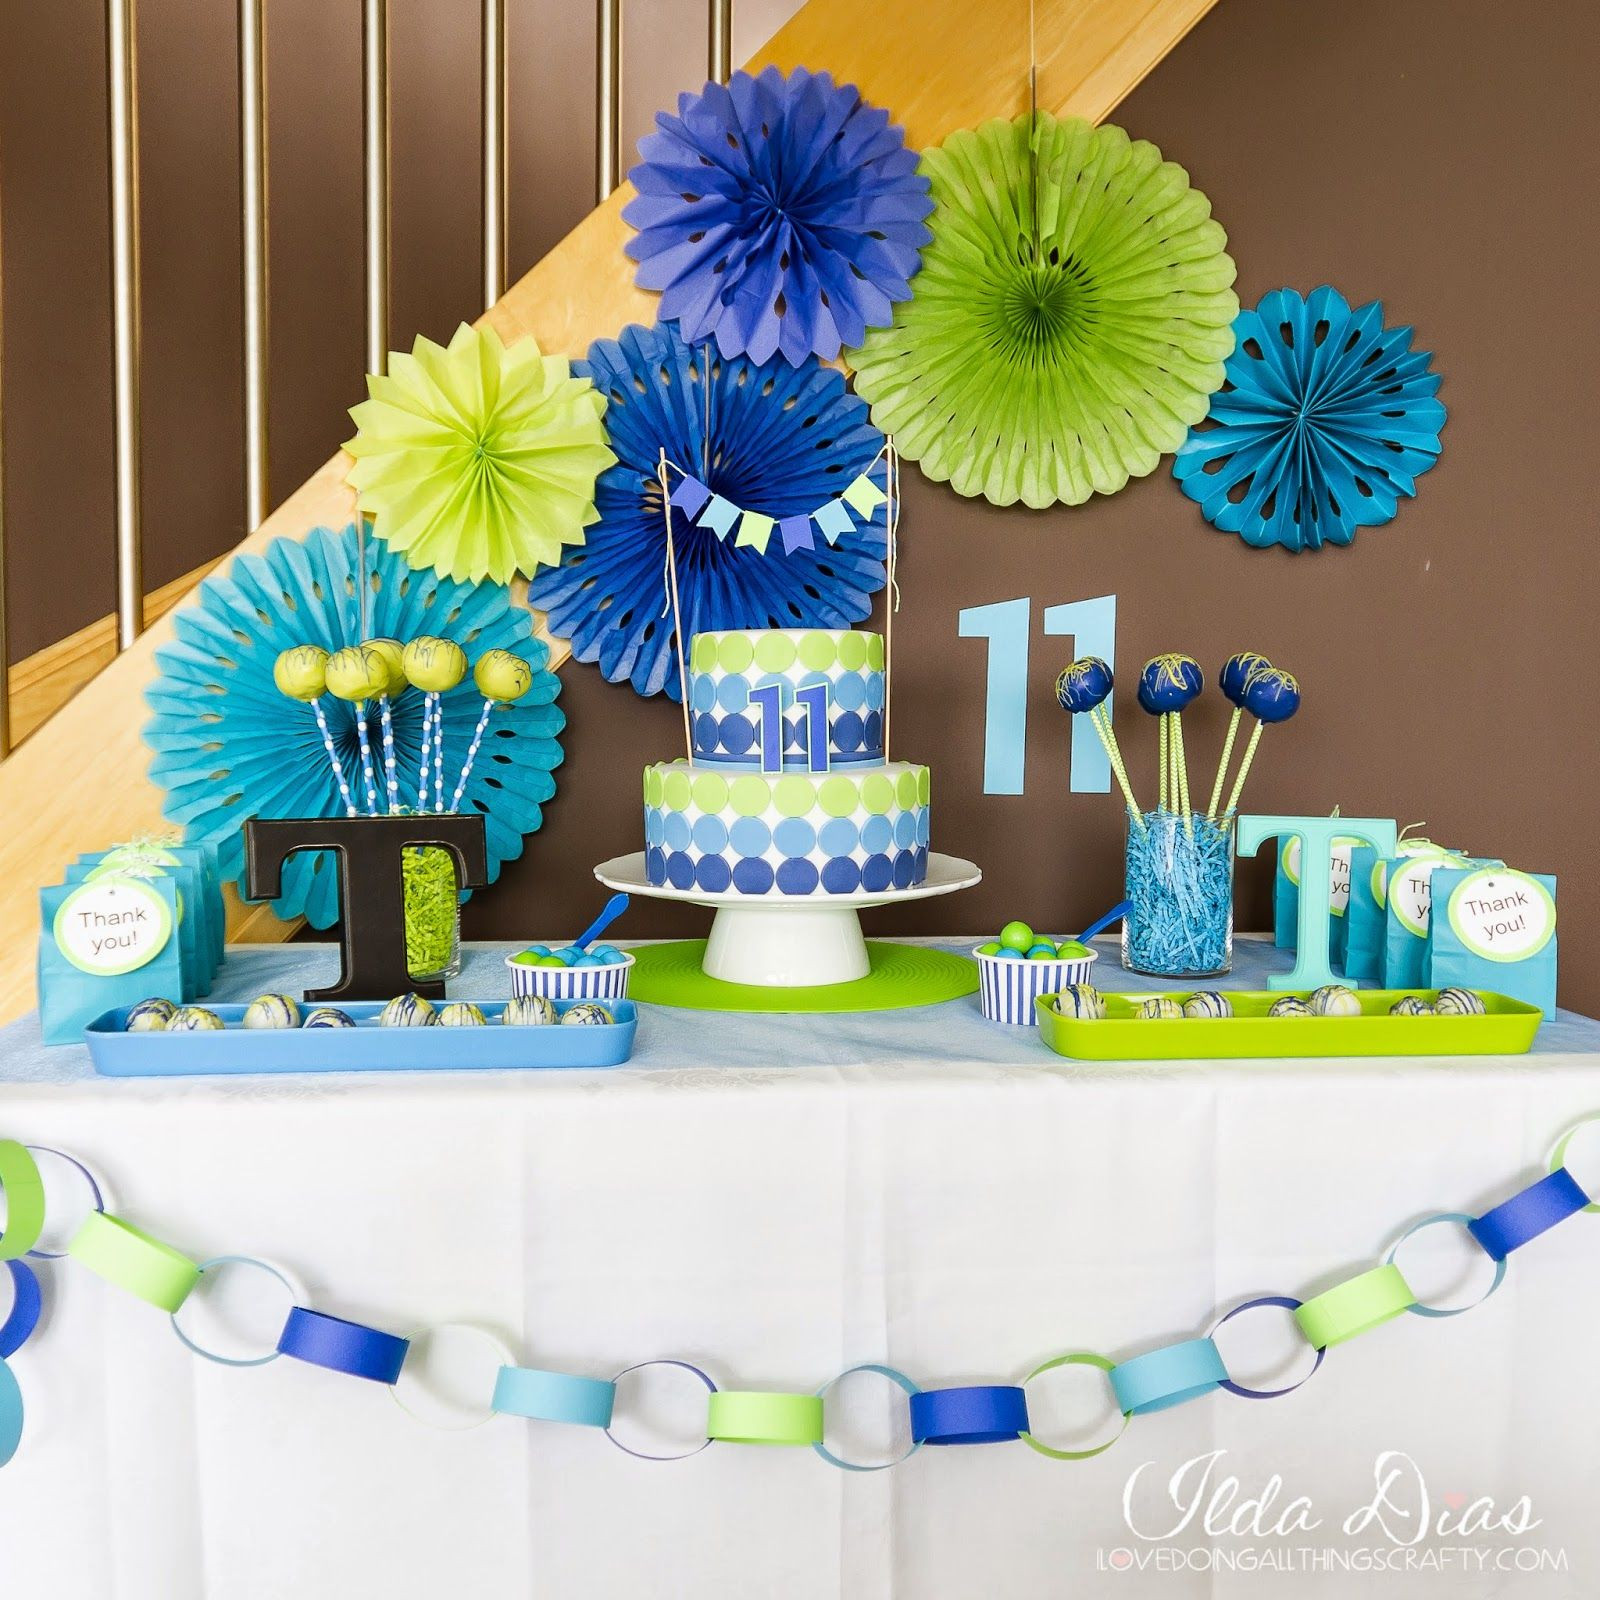 Blue Themed Birthday Party Ideas
 Simple Blue and Green Birthday Party Theme Tomas 11th